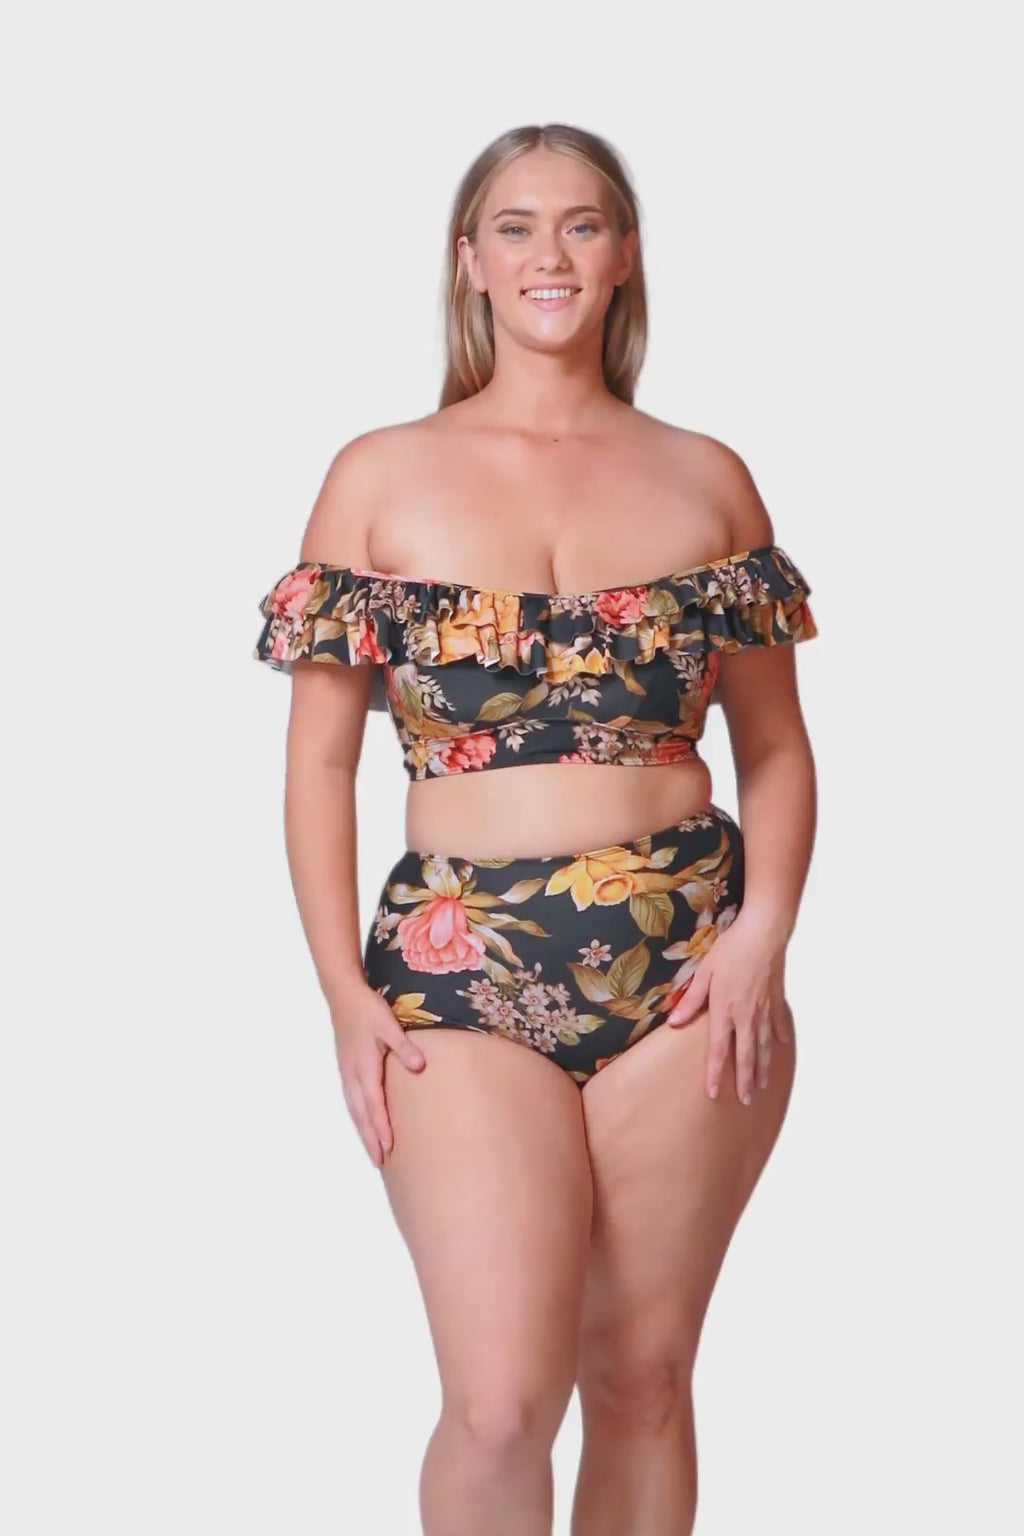 Model wearing mature ladies high waisted swim bottoms in floral print with black base and orange, red and yellow tones